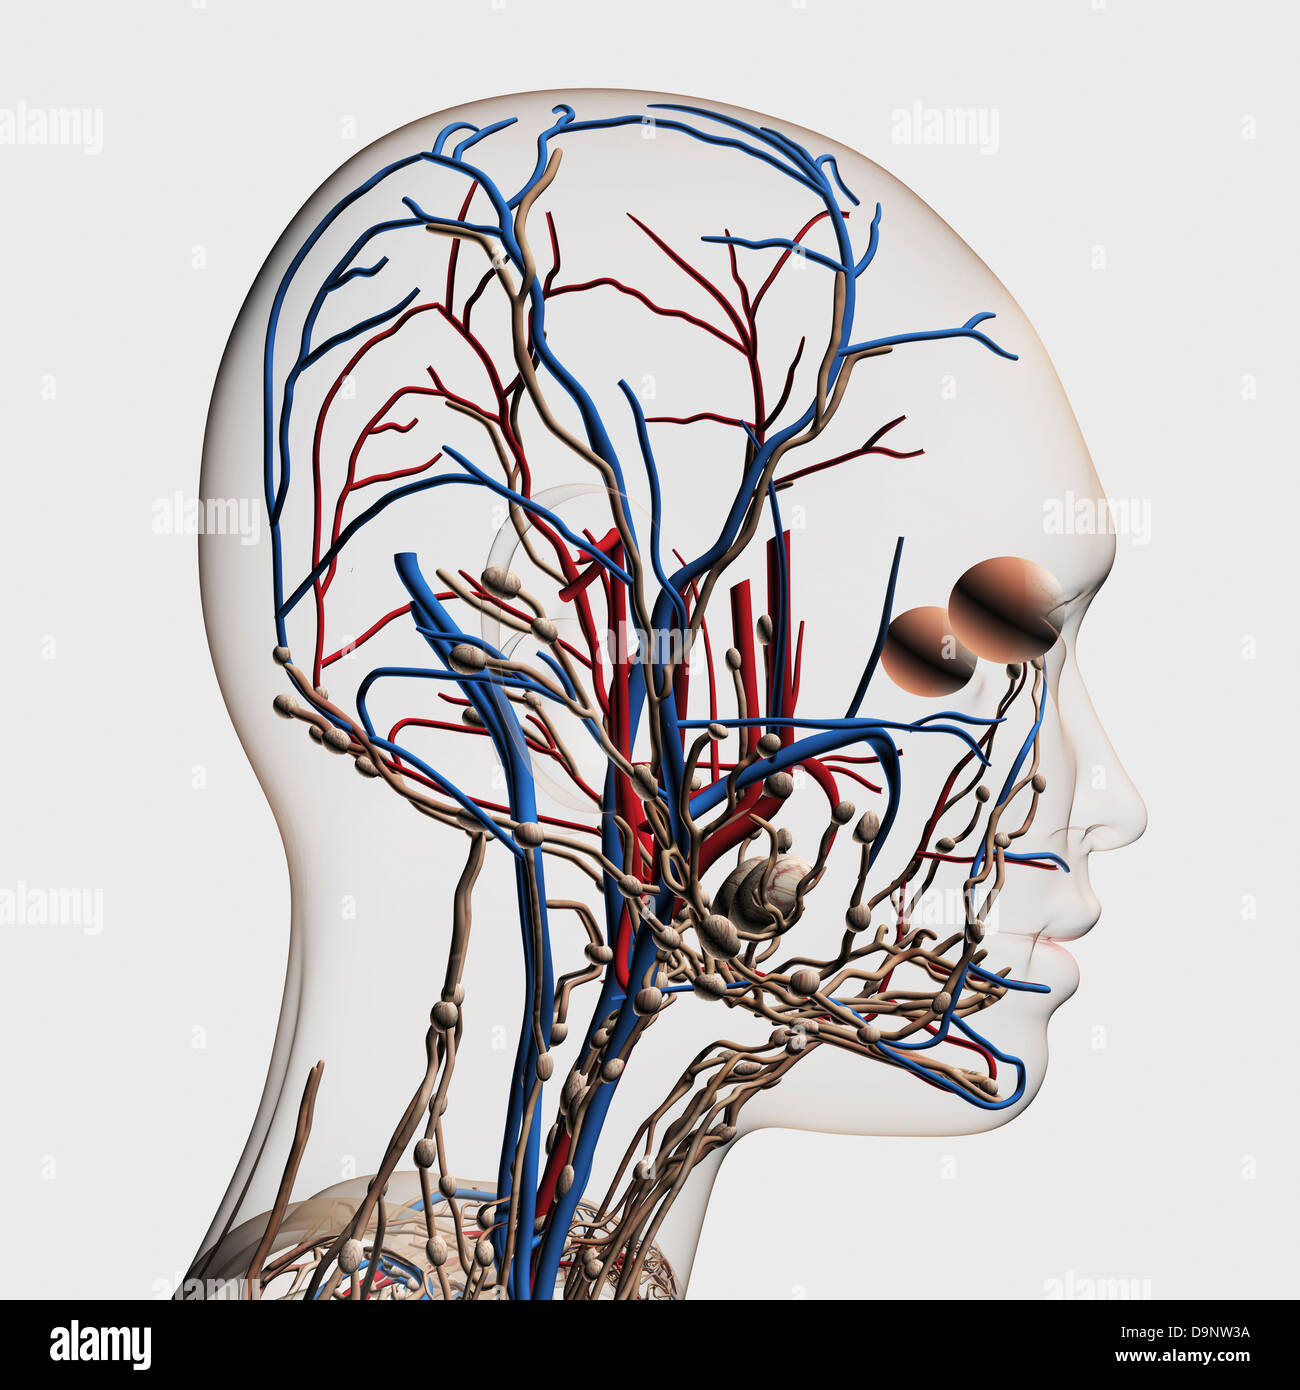 Medical illustration of head arteries, veins and lymphatic system, side view. Stock Photo